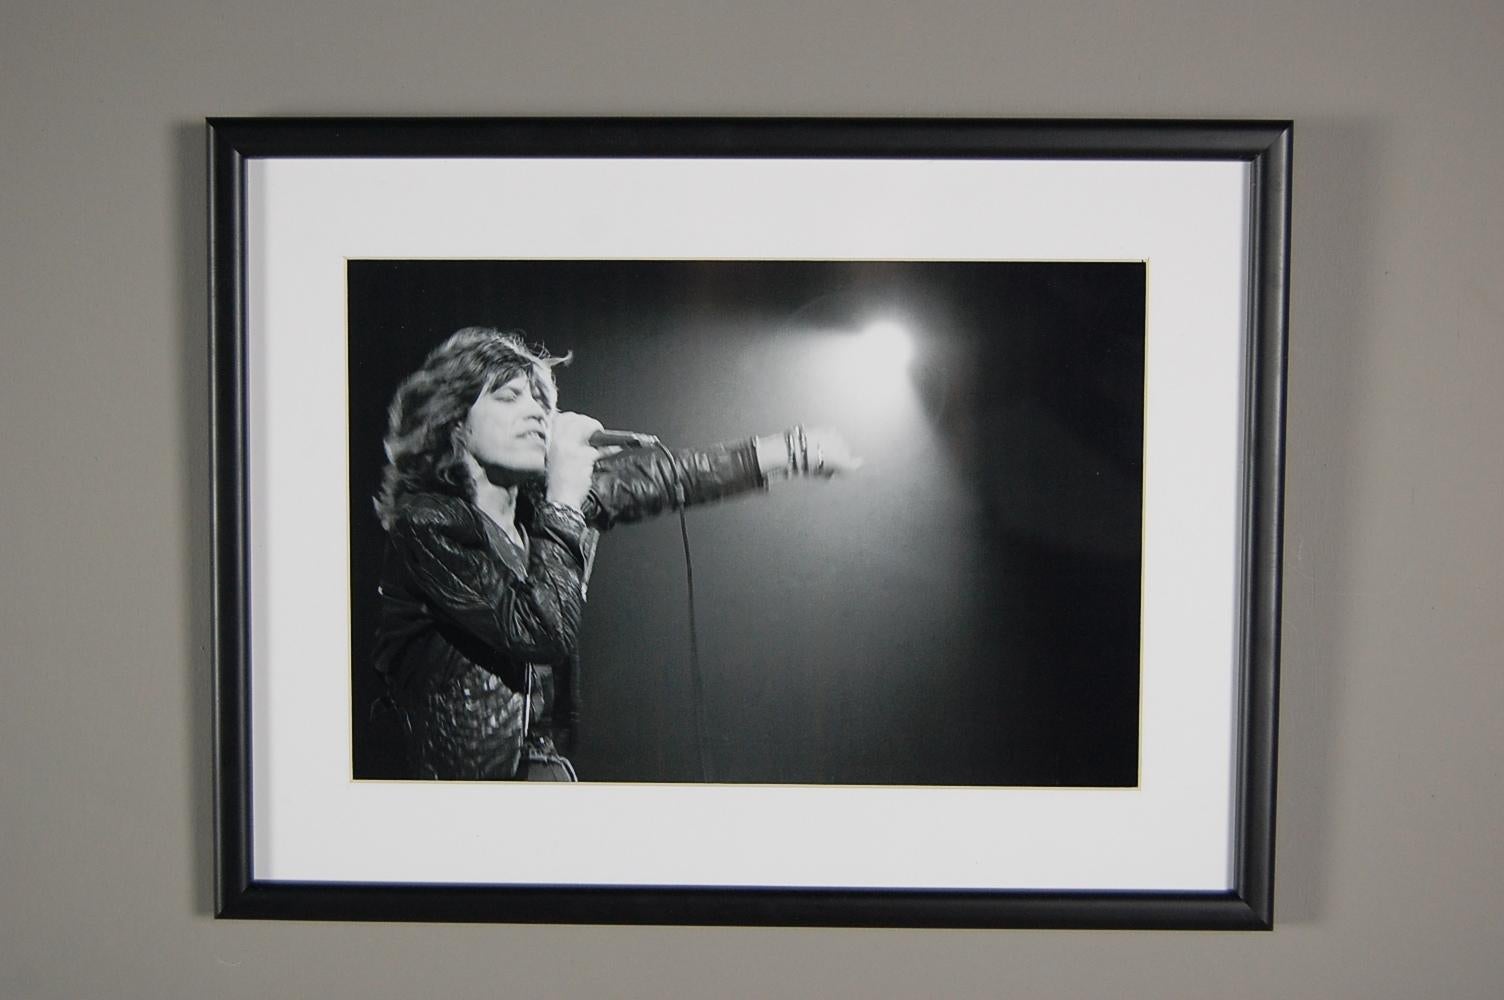 Mick Jagger Photograph, on Stage, London In Excellent Condition In Pease pottage, West Sussex